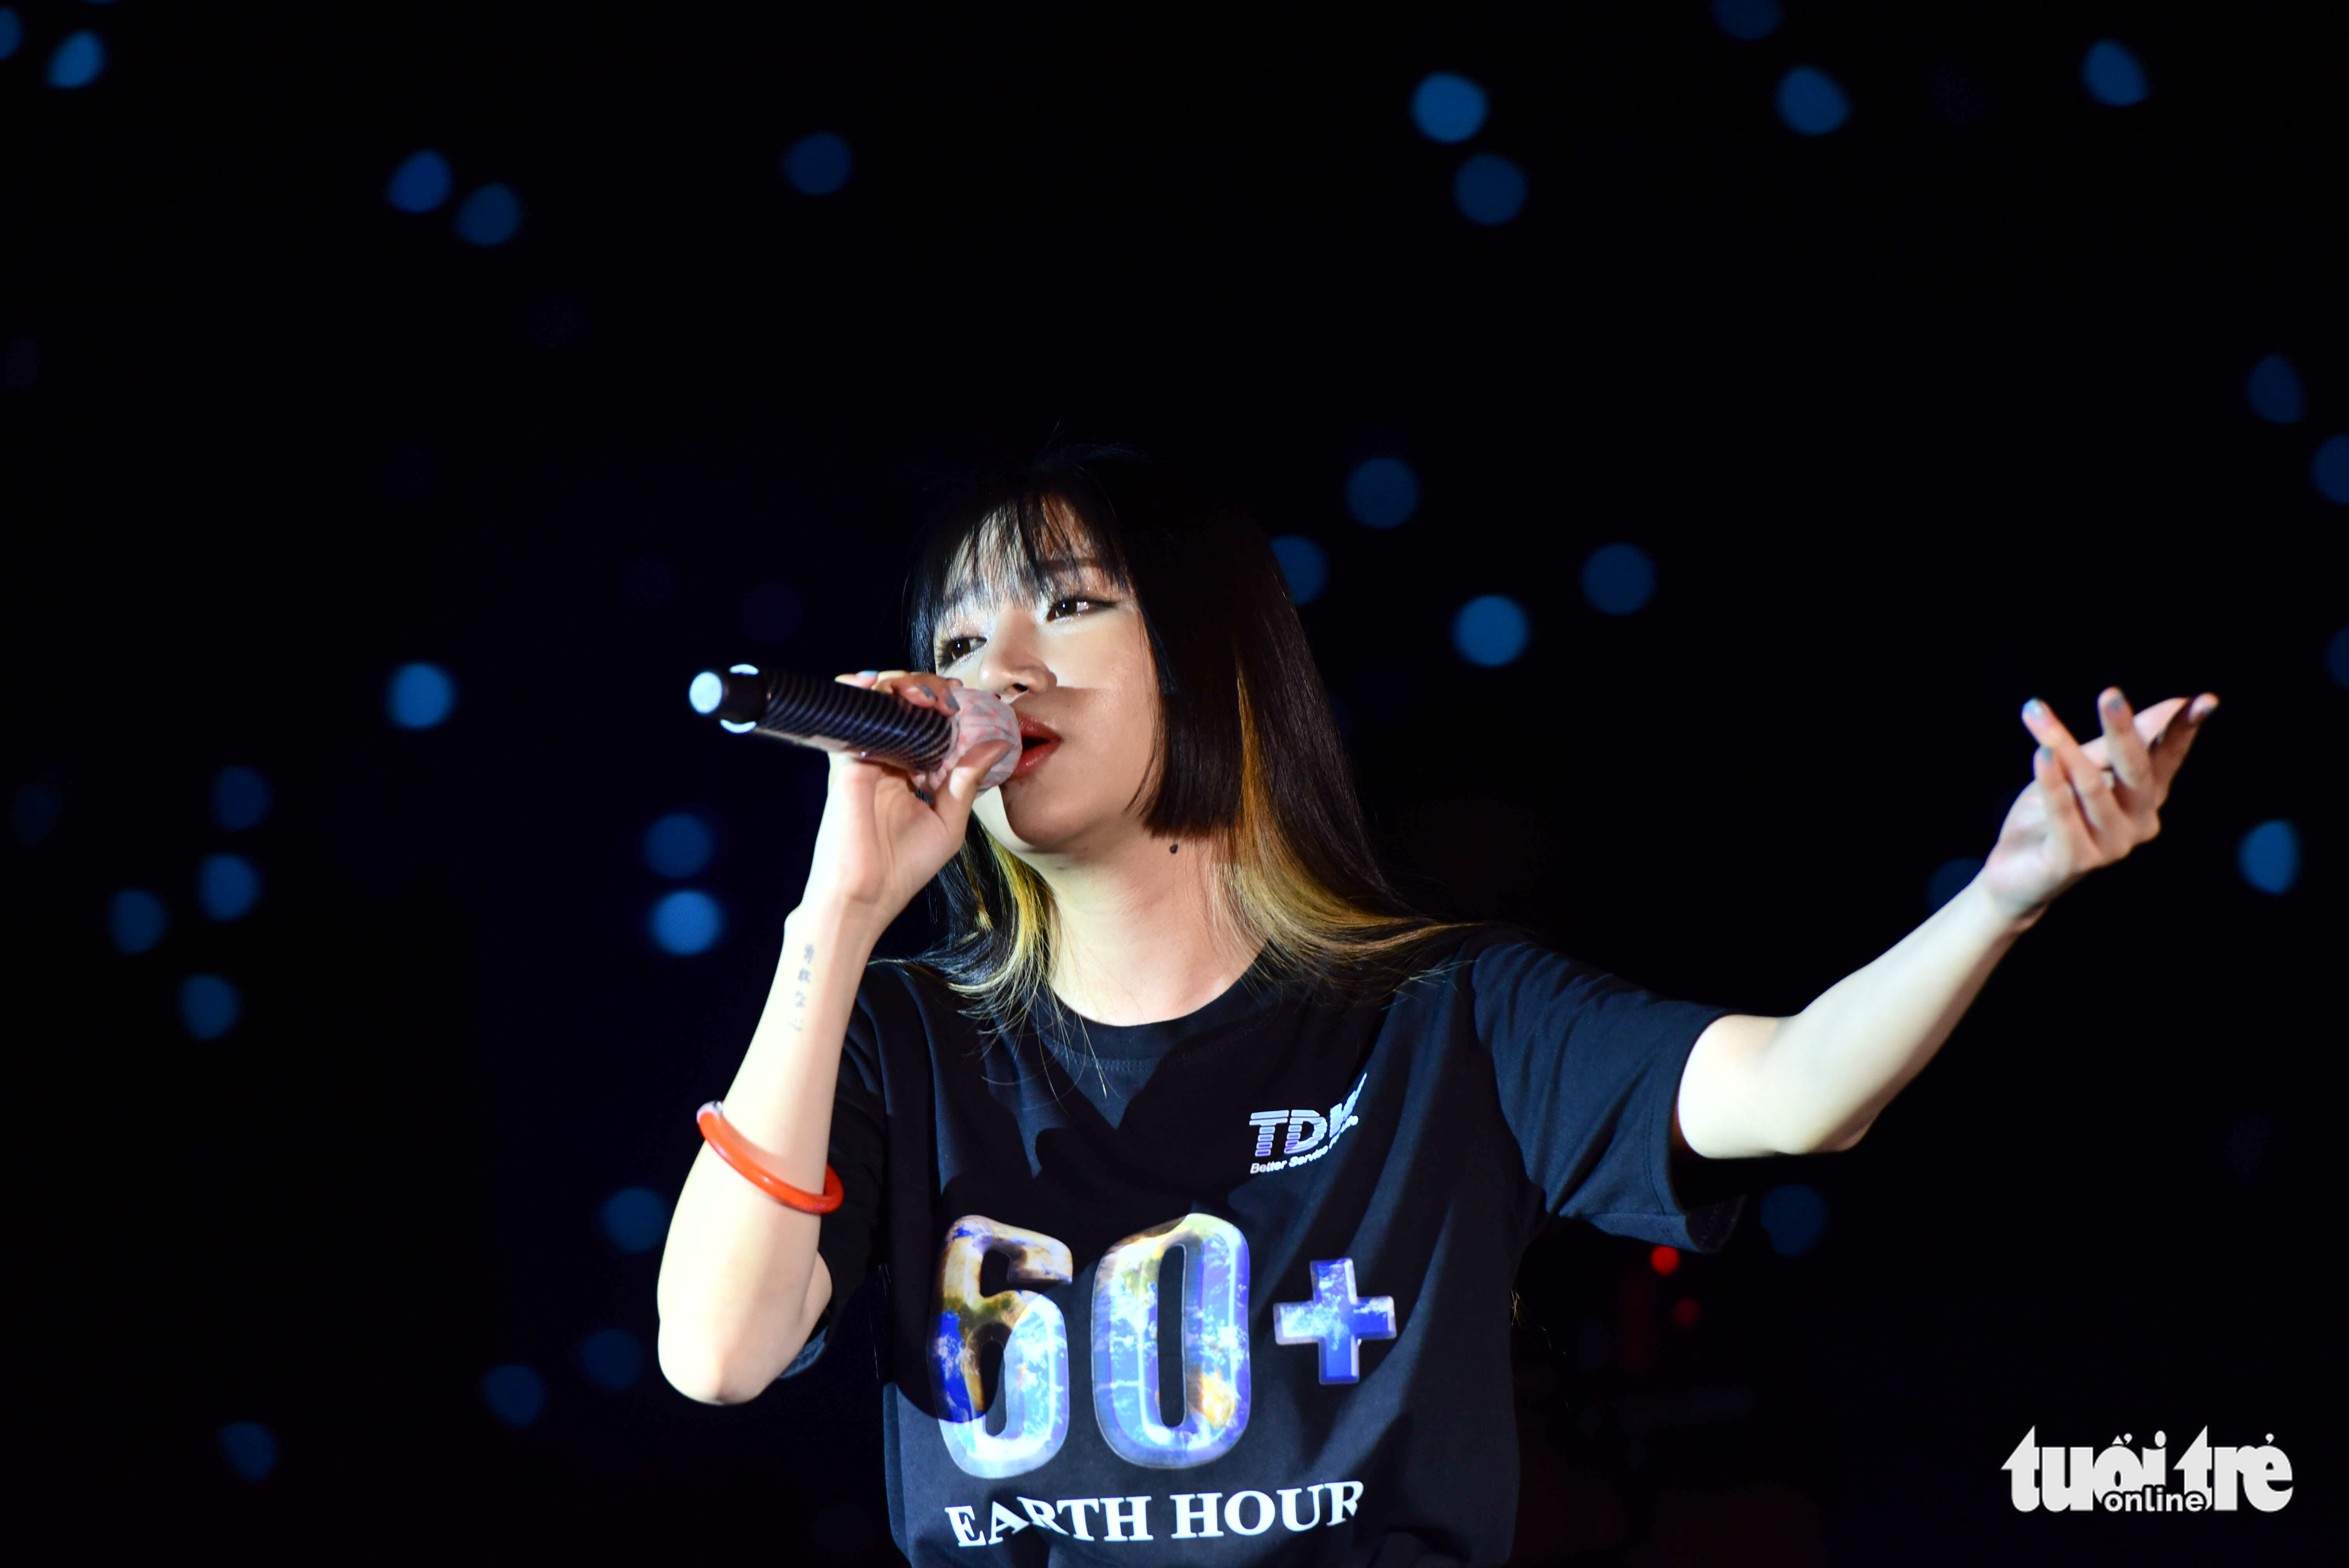 Singer Orange performs at the event marking the 2022 Earth Hour in Ho Chi Minh City, March 26, 2022. Photo: Duyen Phan / Tuoi Tre